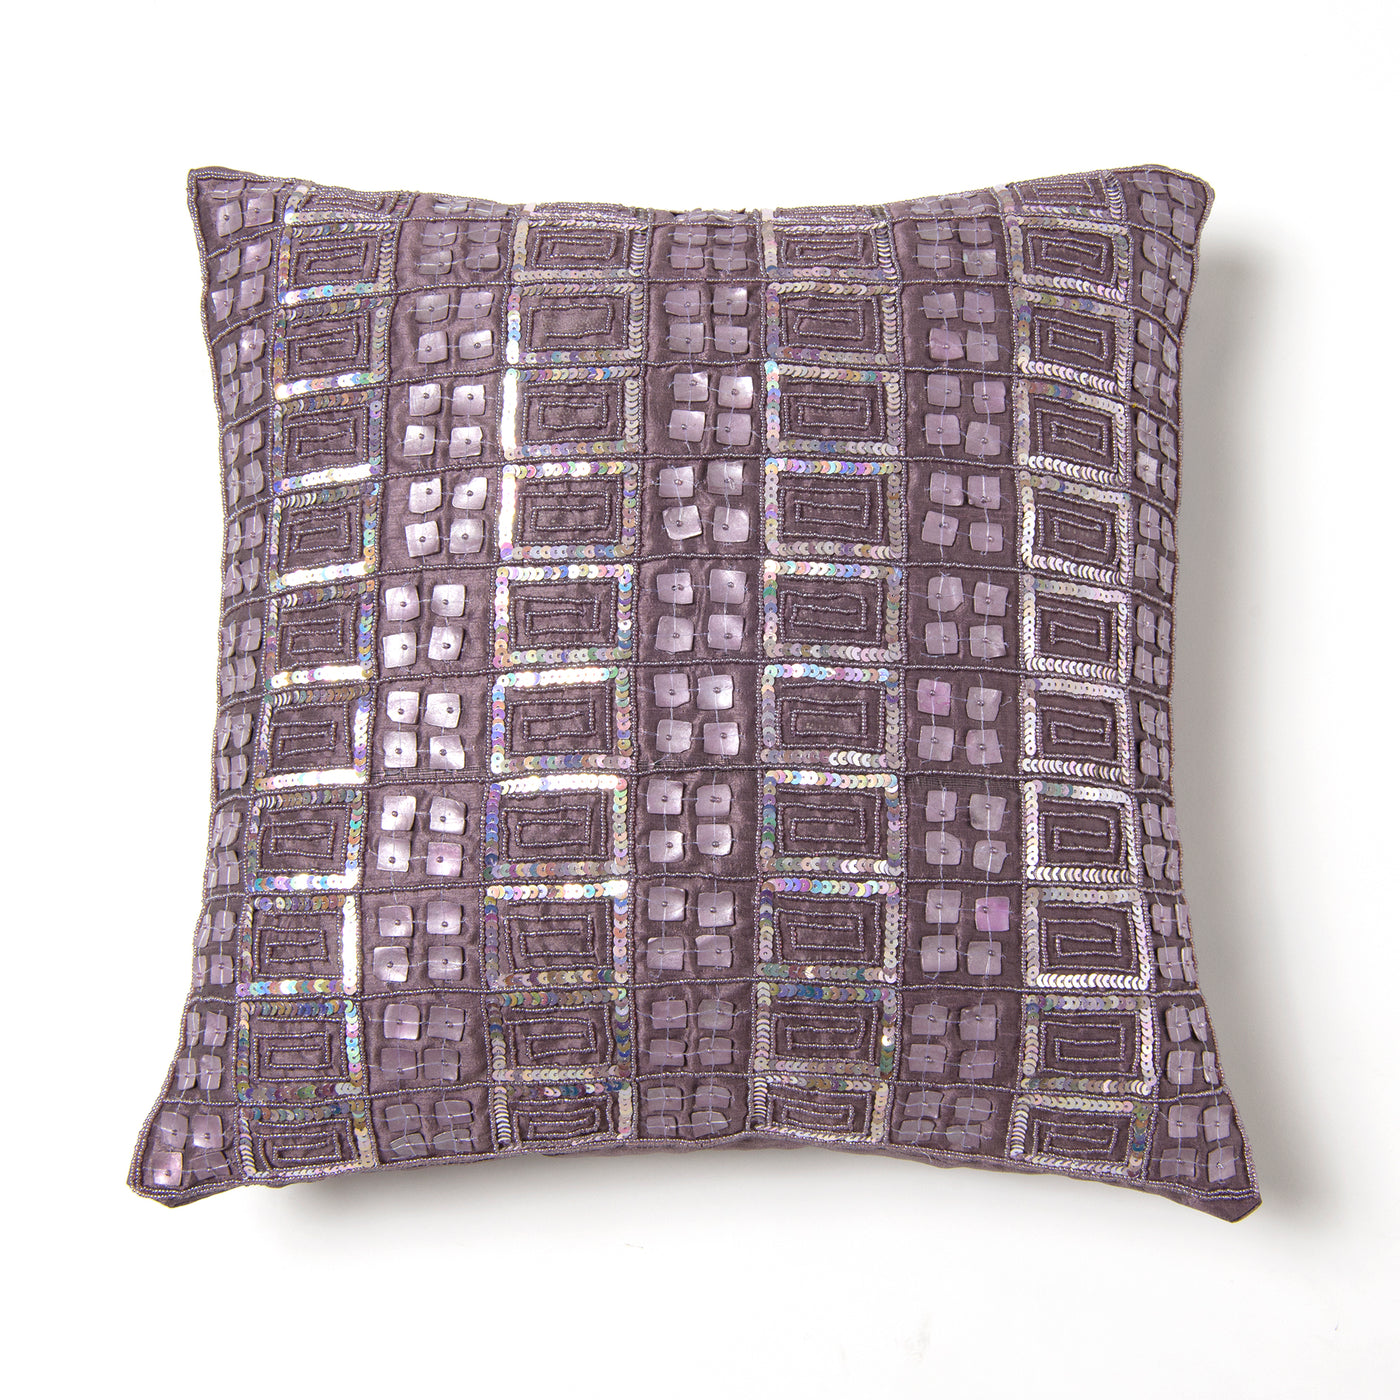 Mother of Pearl and Sequin Pillow